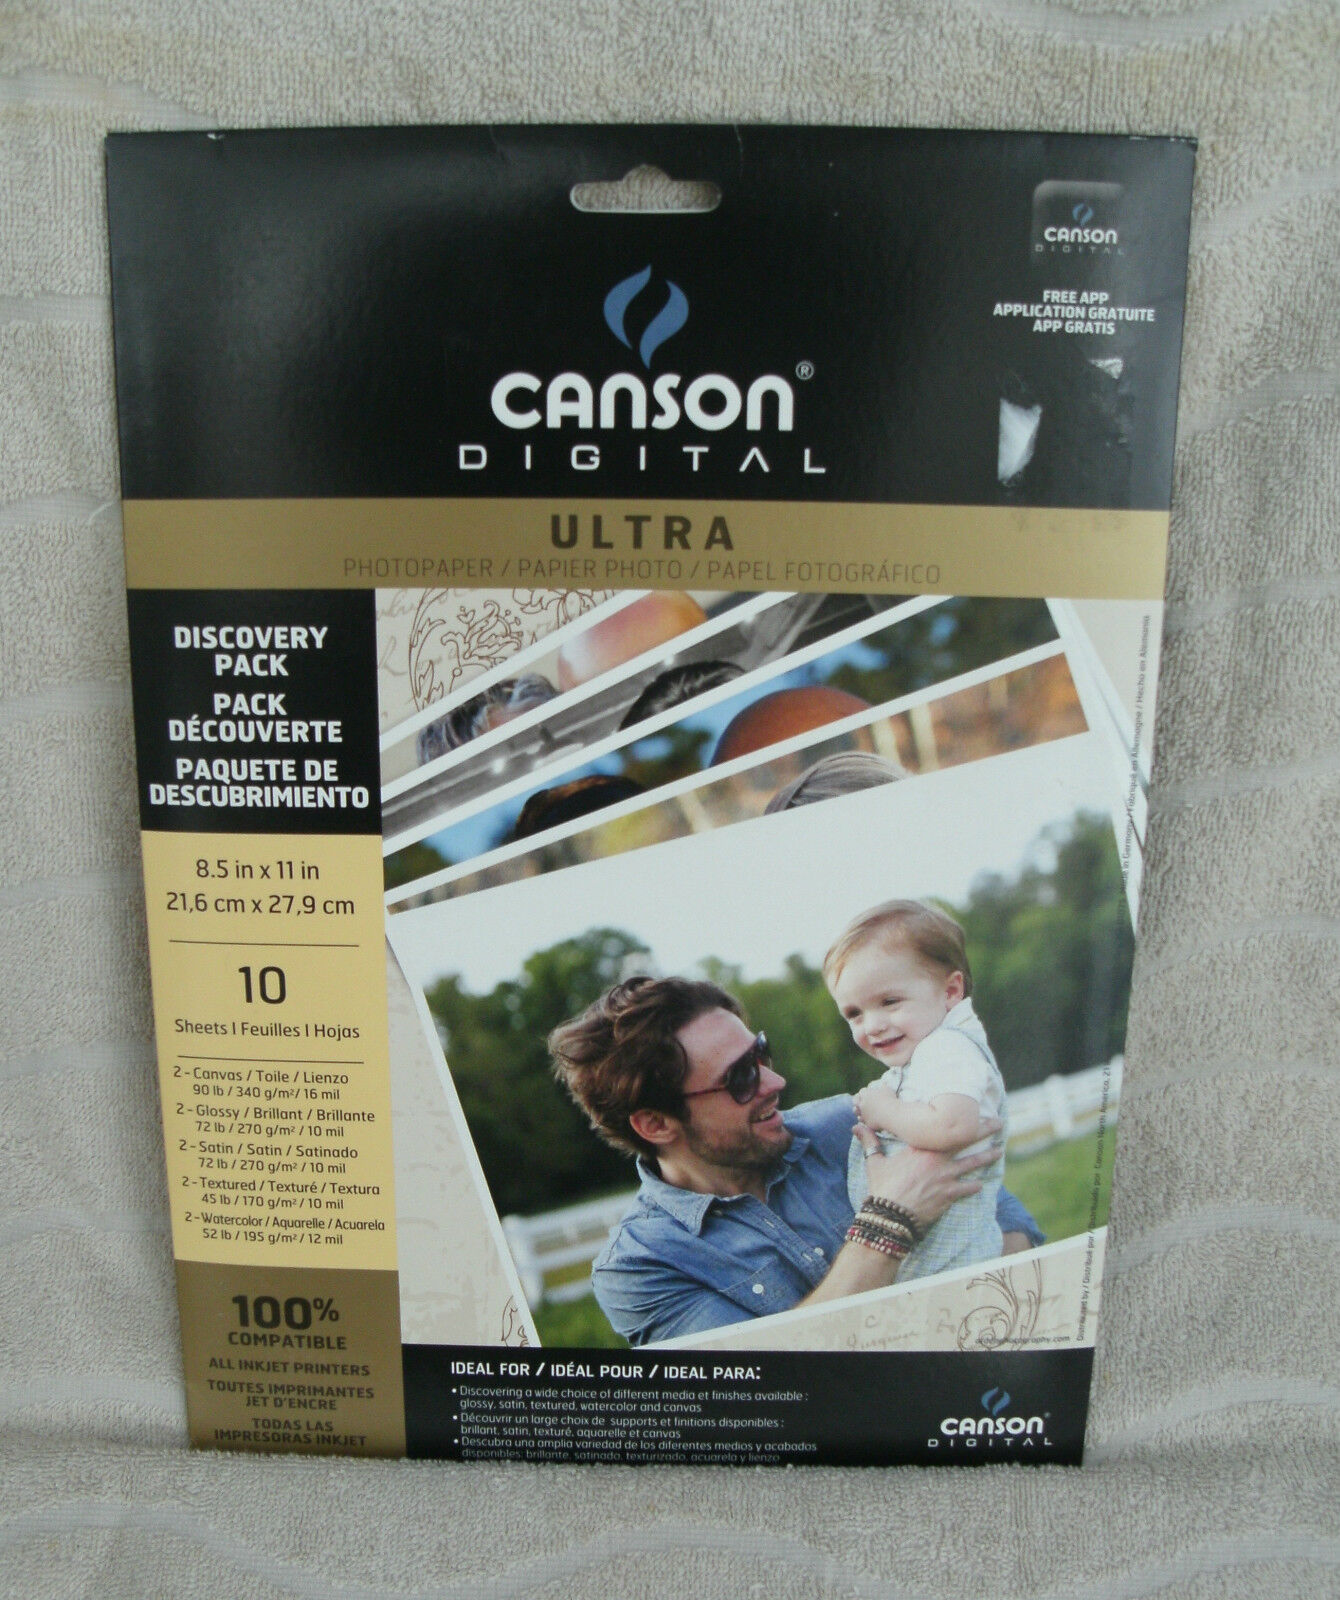 Canson Ultra Digital Imaging Paper Discovery Pack 10 Sheets ~ NEW